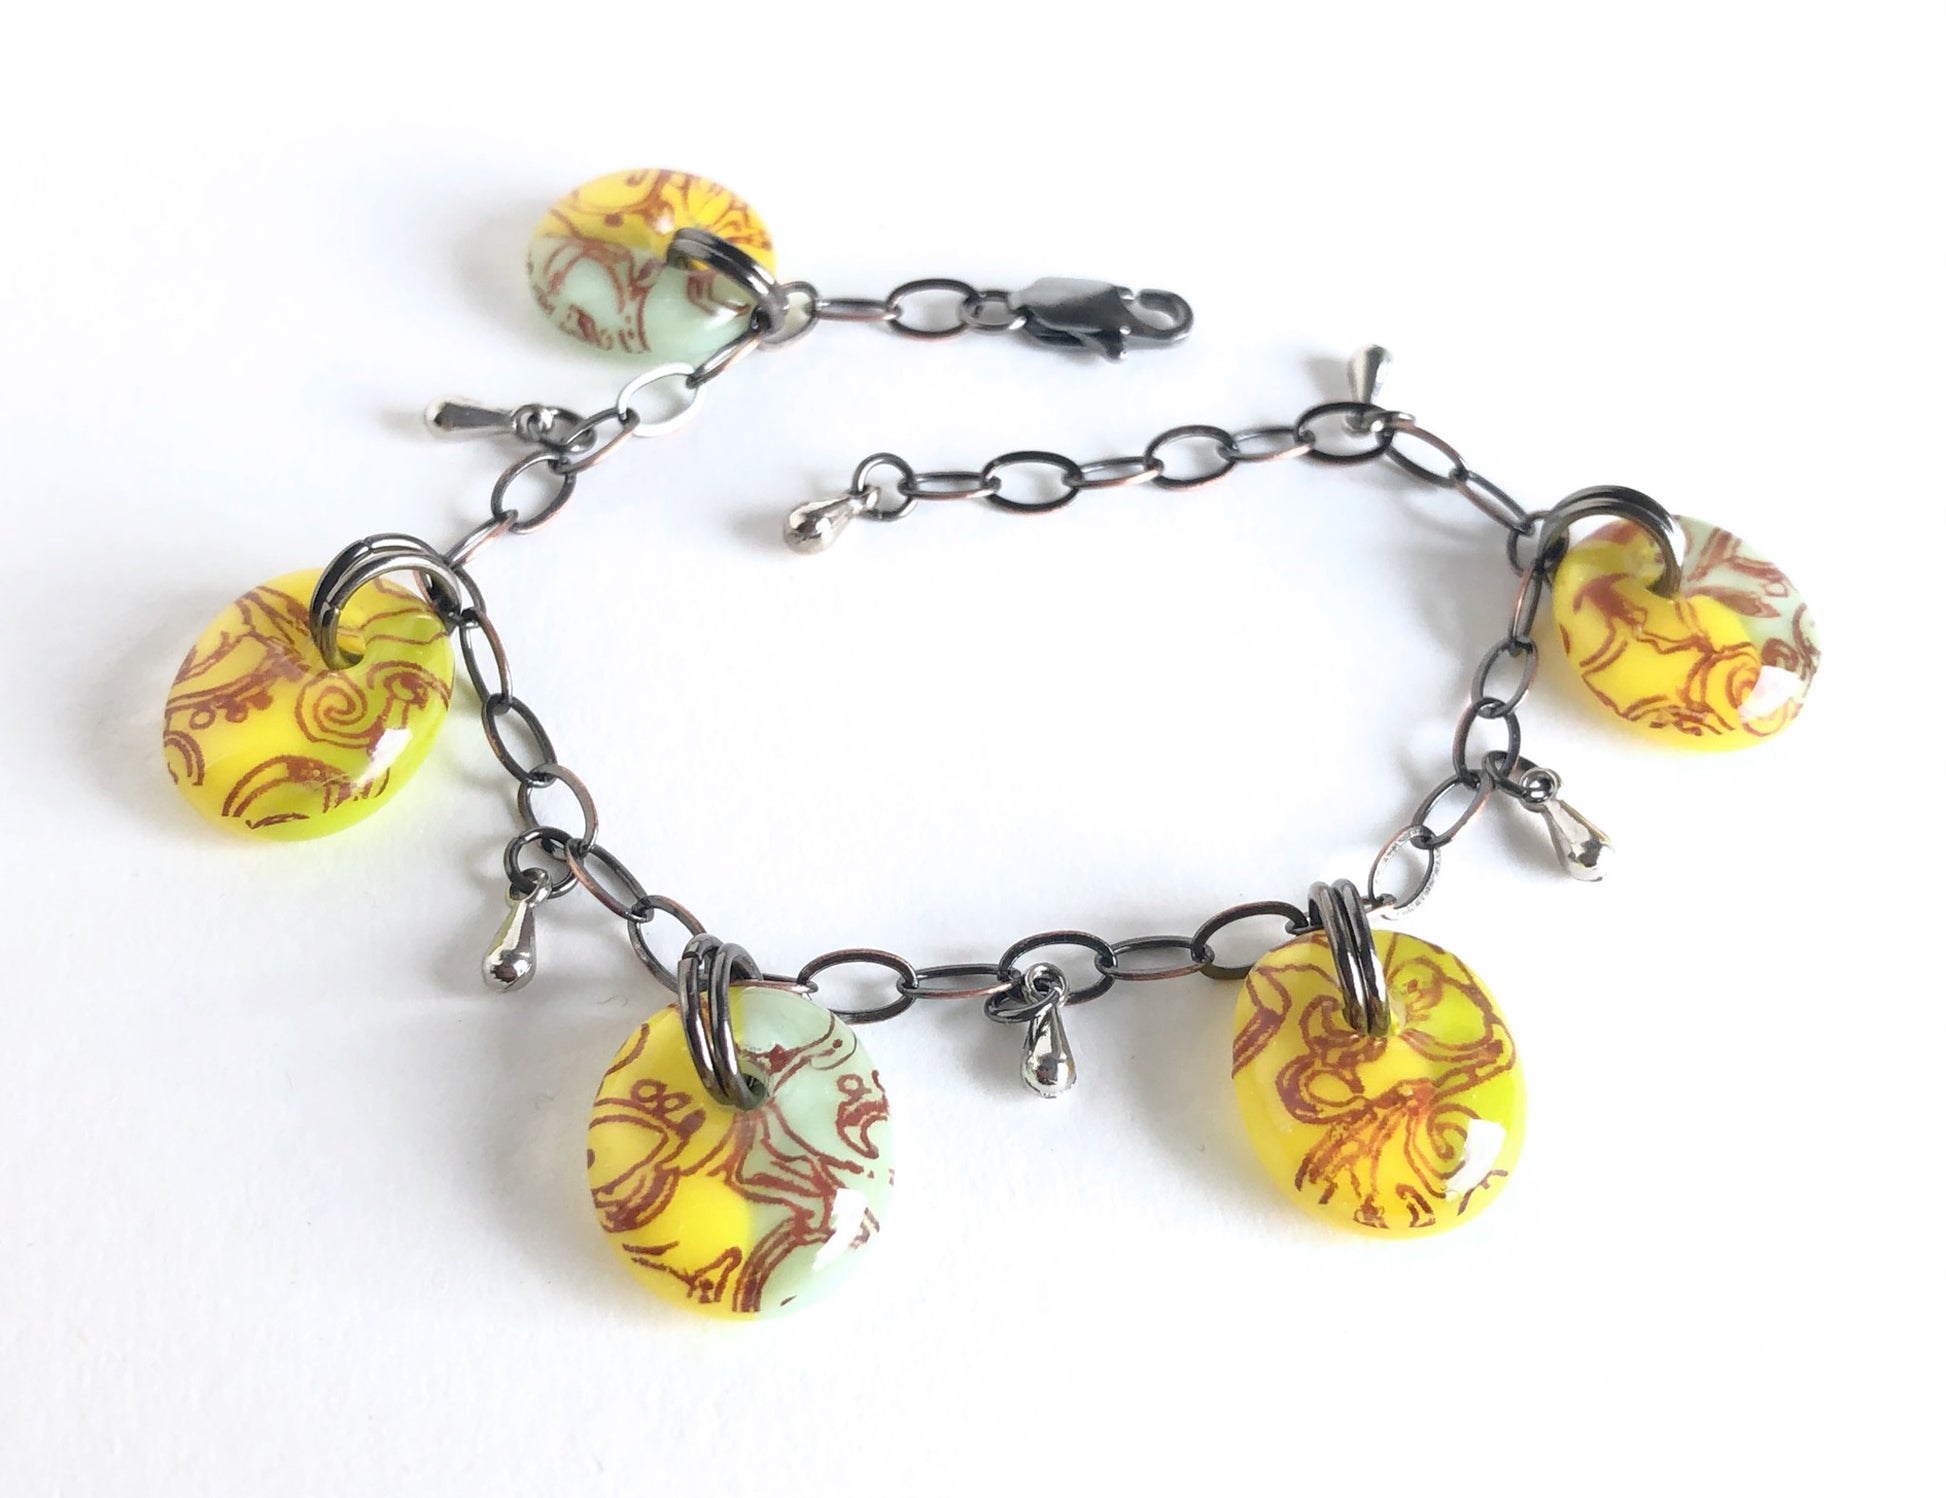 A one of a kind adjustable fused glass bracelet with warm yellow and pastel and light olive green glass drops.